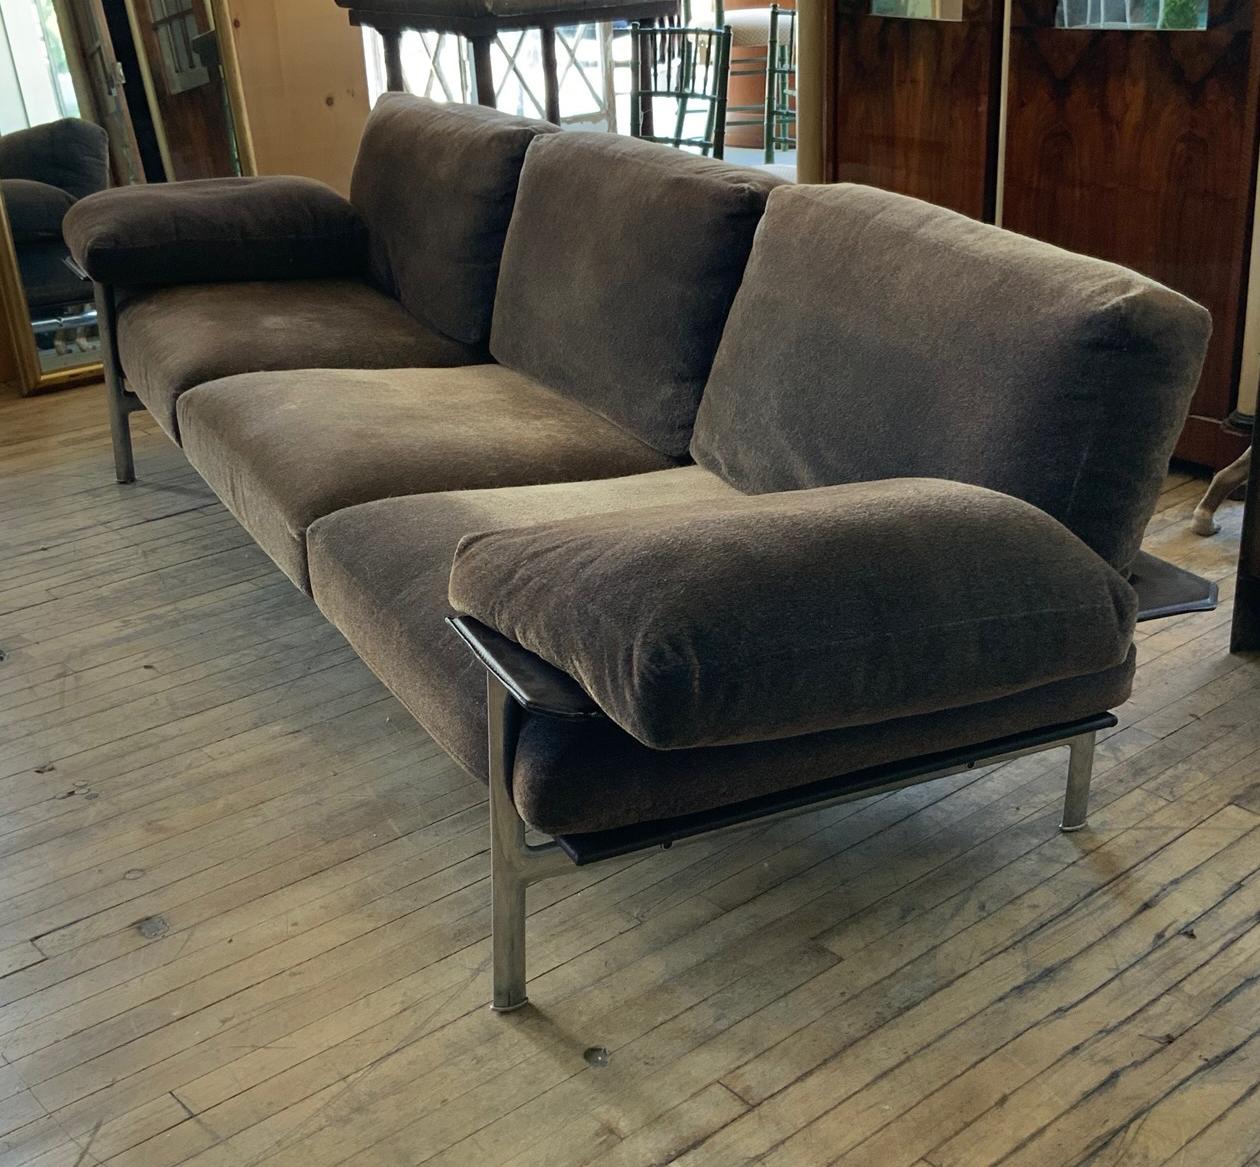 An outrageously comfortable and stylish 1990s Diesis sofa designed by Antonio Citterio and made in Italy by B&B Italia. With a polished stainless steel frame, wrapped with saddle leather, and the cushions upholstered in a brown velvet with hints of